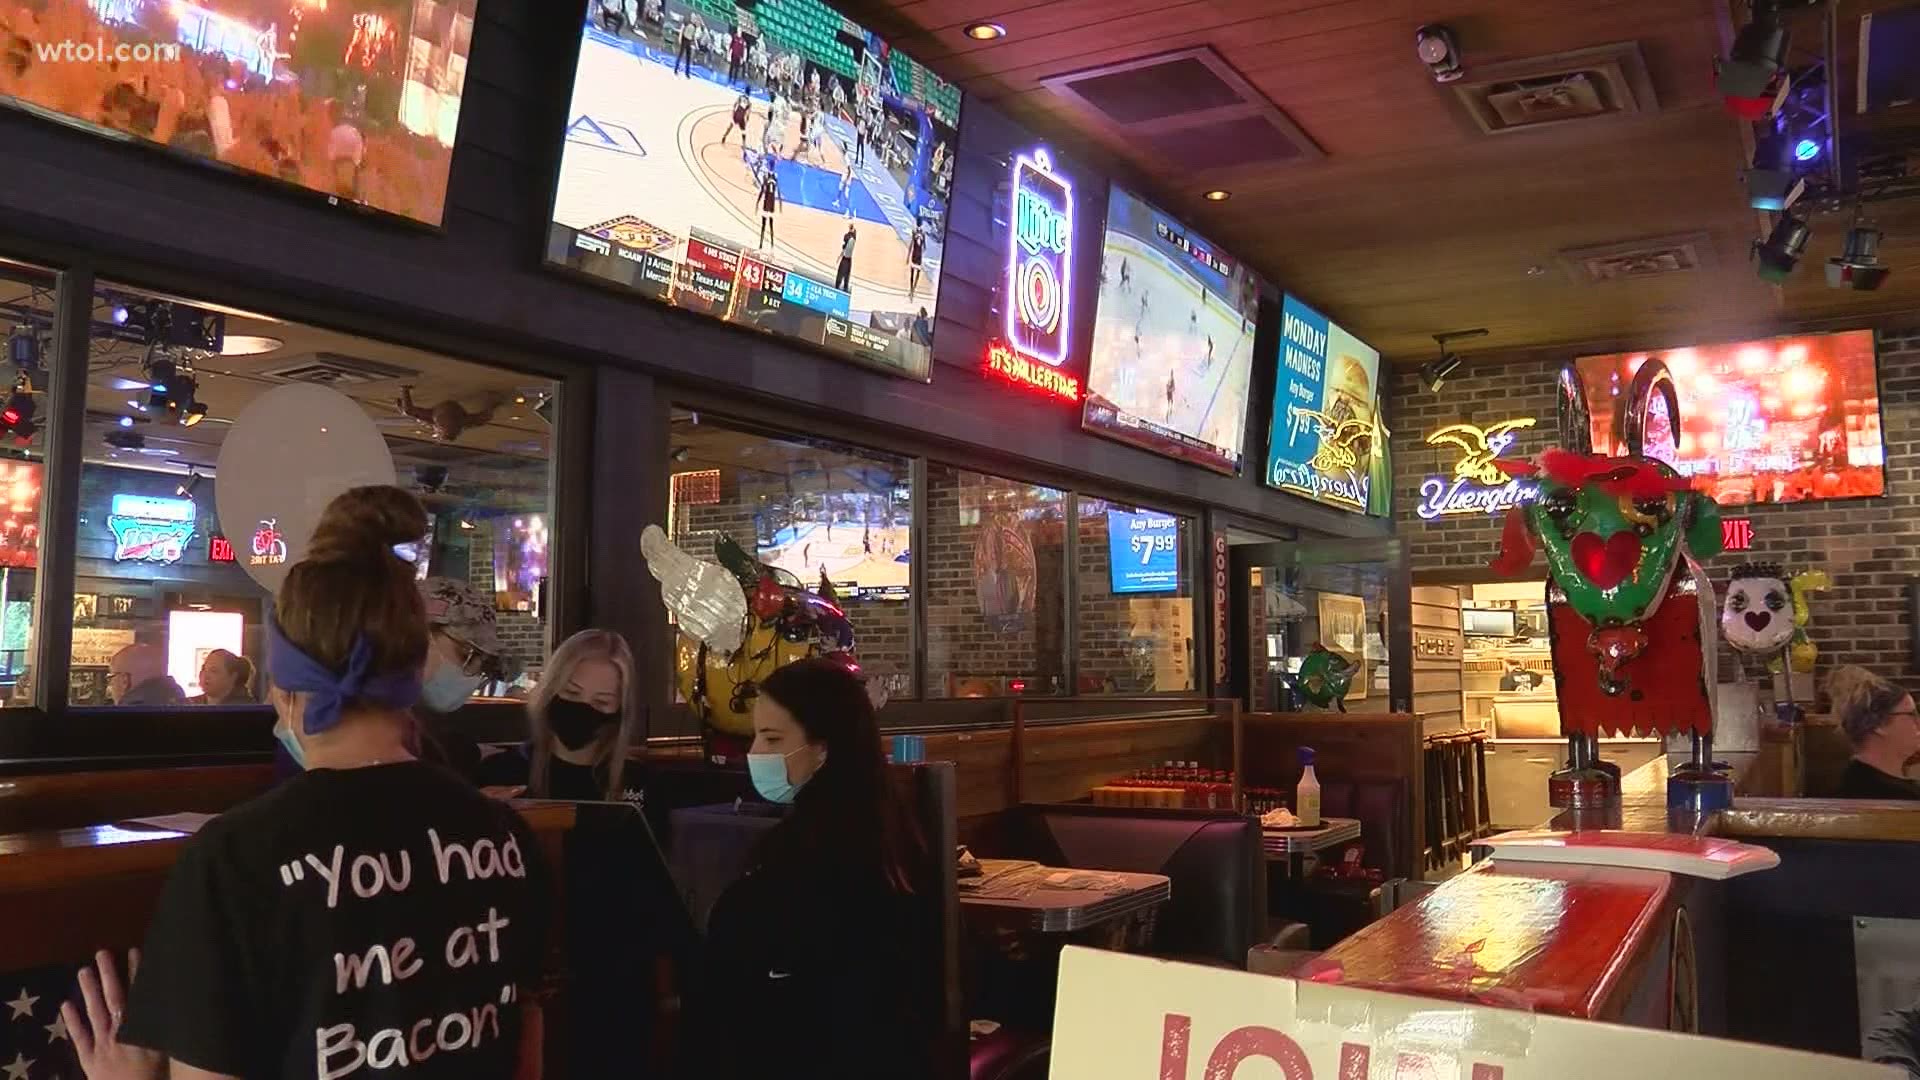 The return of the NCAA tournament has brought increased business to area restaurants and bars.